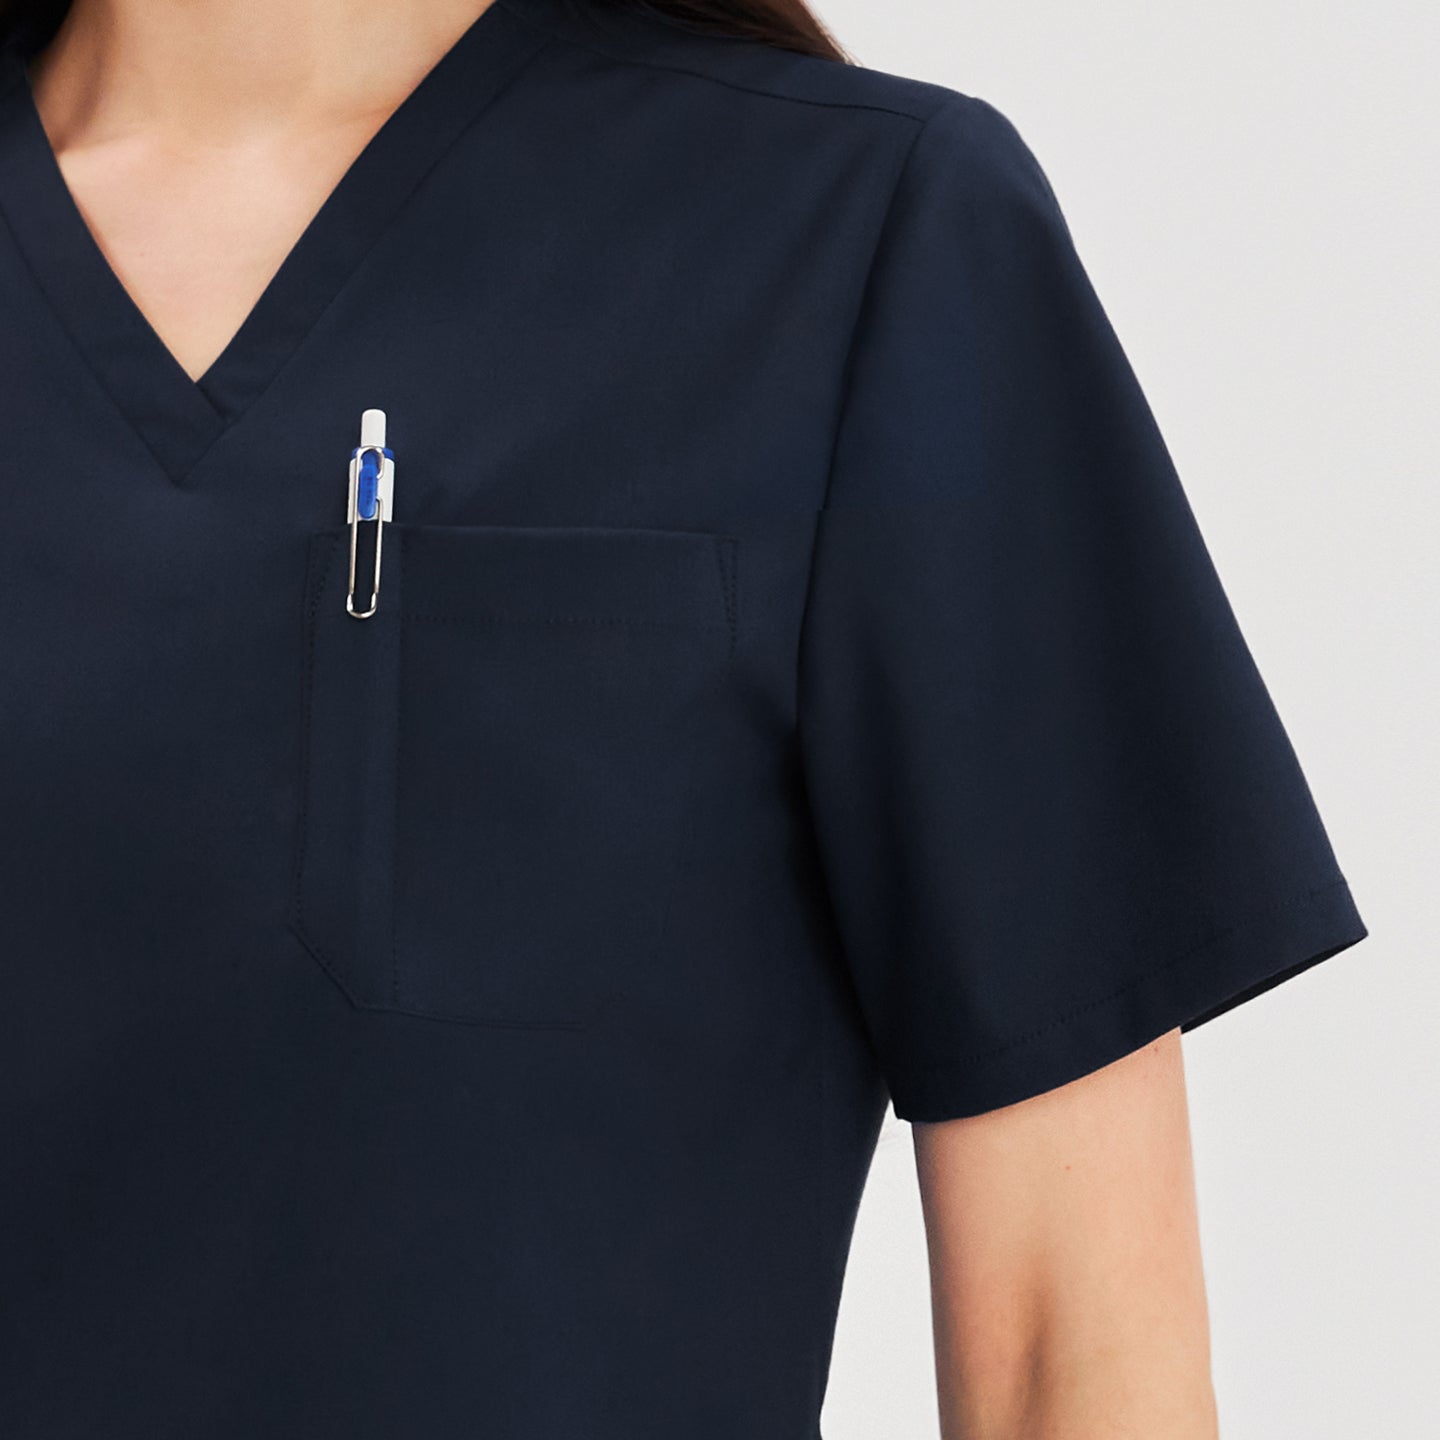 Close-up view of the chest pocket detail on a scrub top, showing a pen placed in the pocket for utility,Navy